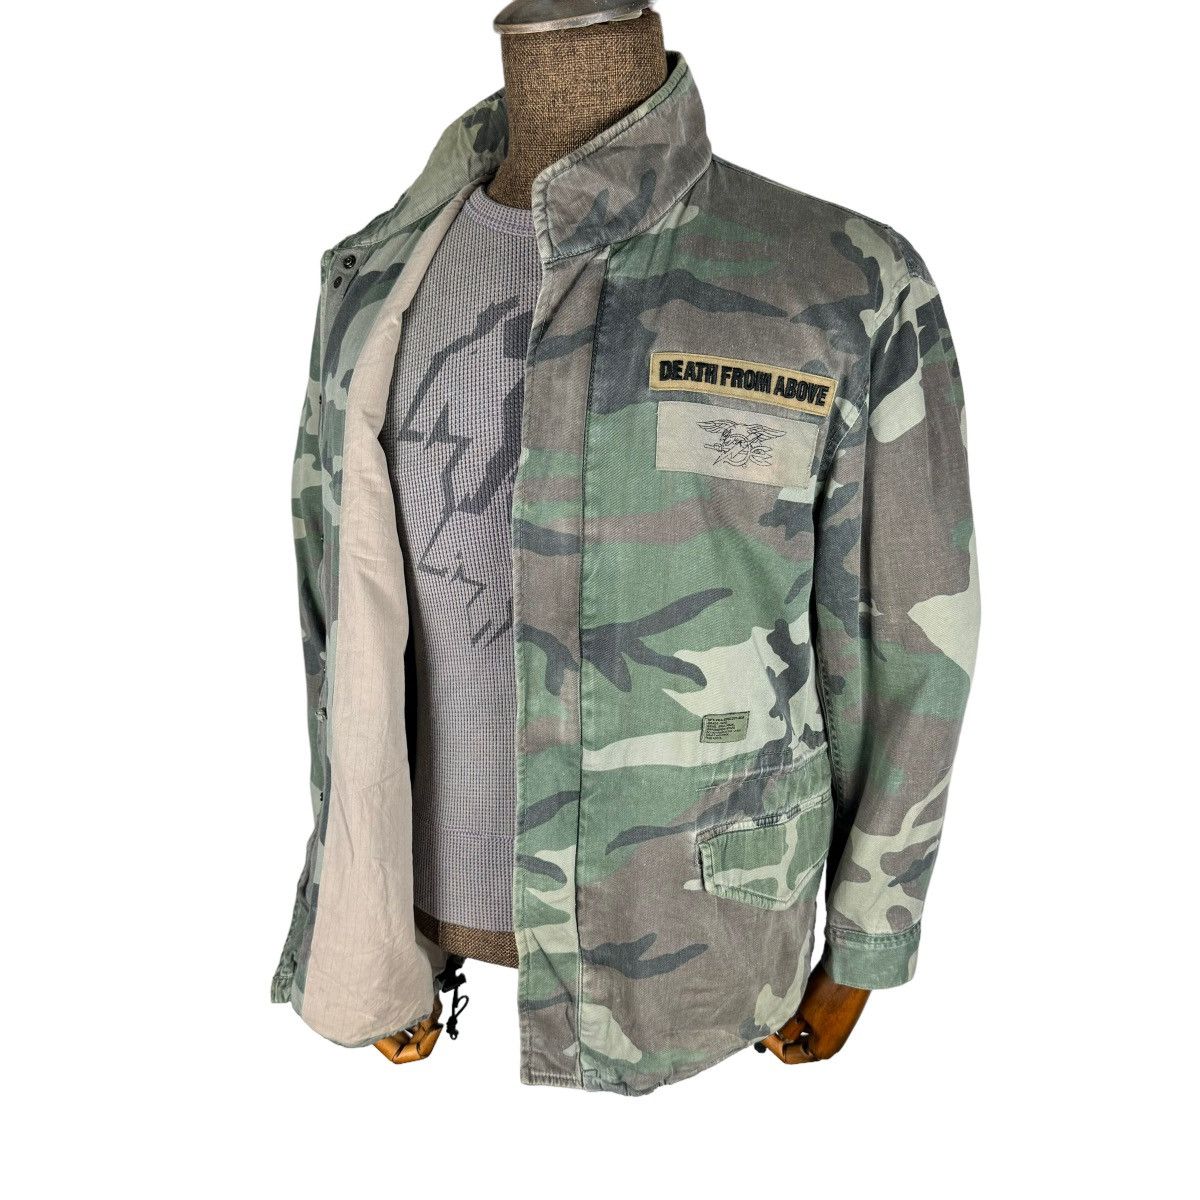 🔥WTAPS M65 Death From Above Ripstop JACKET - 6